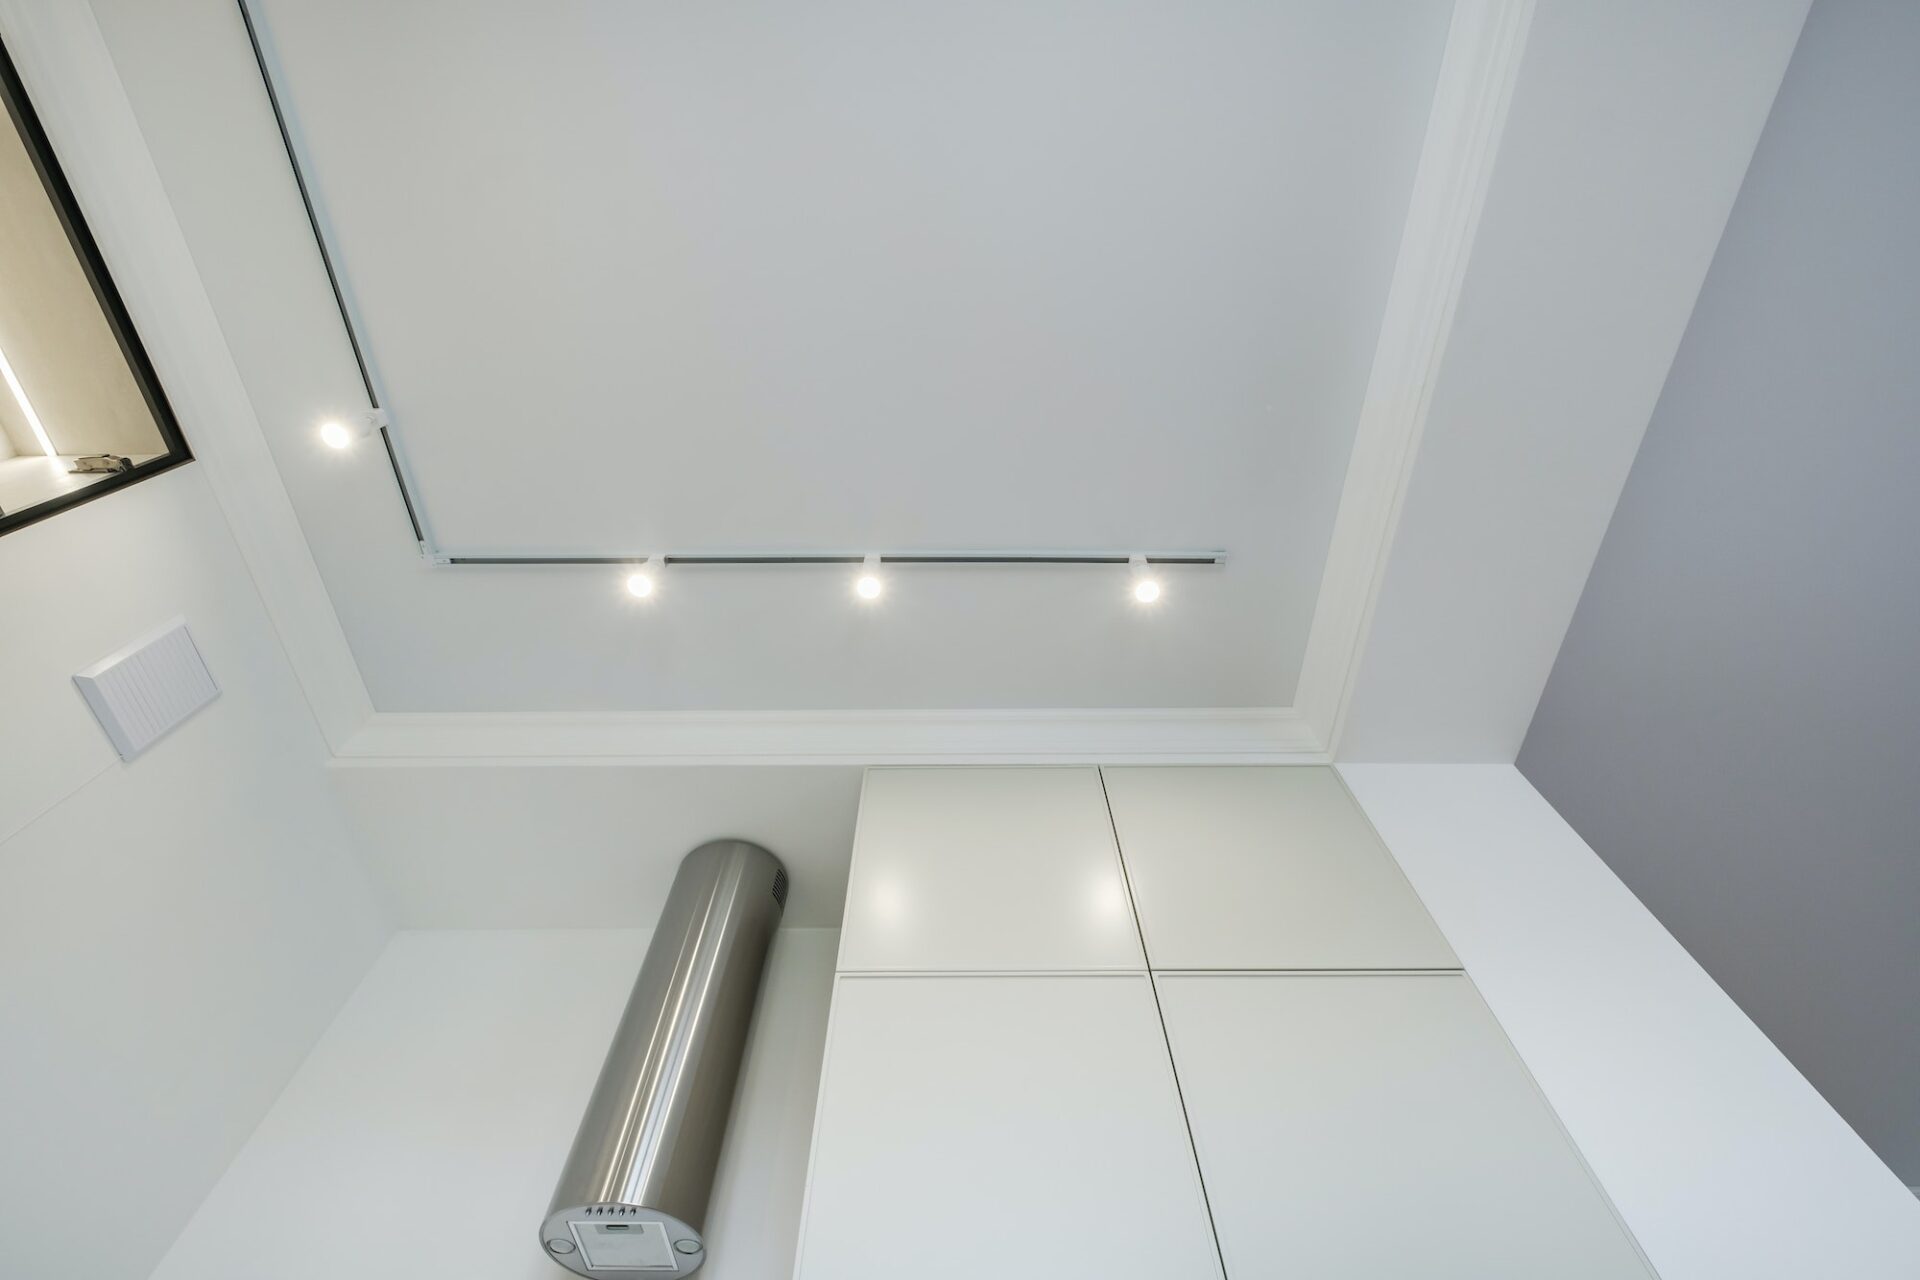 suspended ceiling with halogen spots lamps and drywall construction in empty room